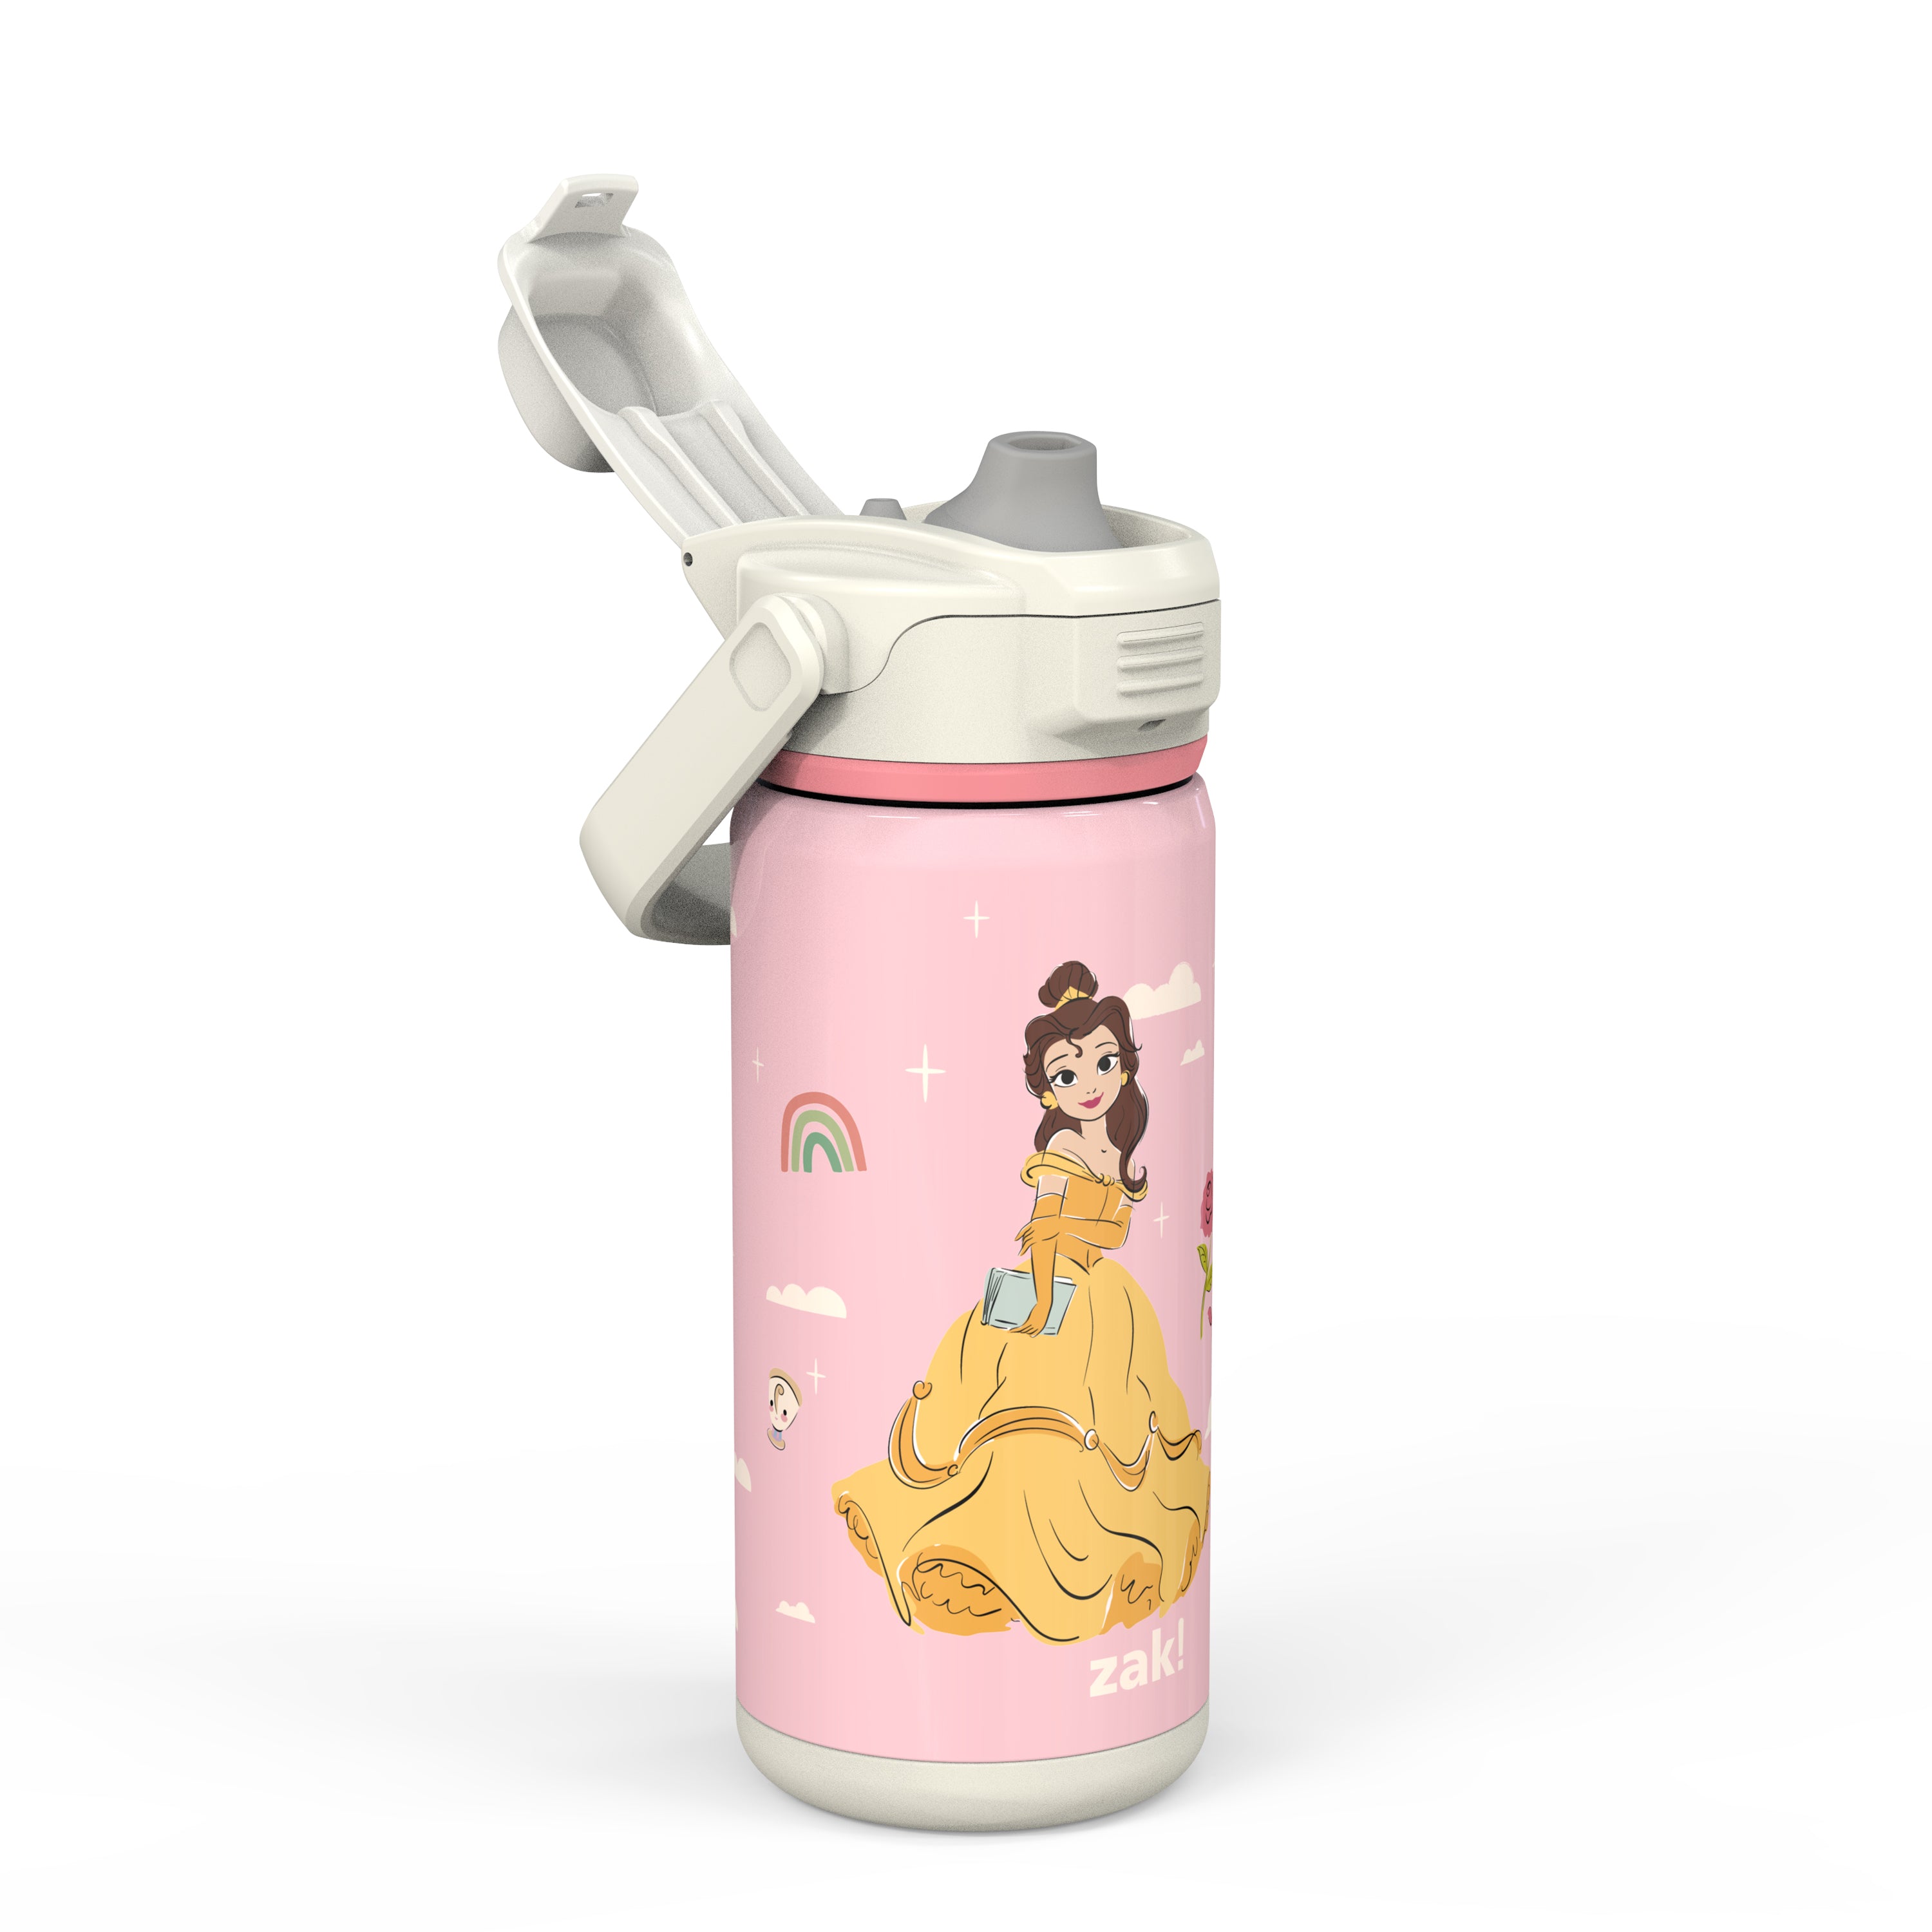 Disney Princess Beacon Stainless Steel Insulated Kids Water Bottle with Covered Spout, 14 Ounces